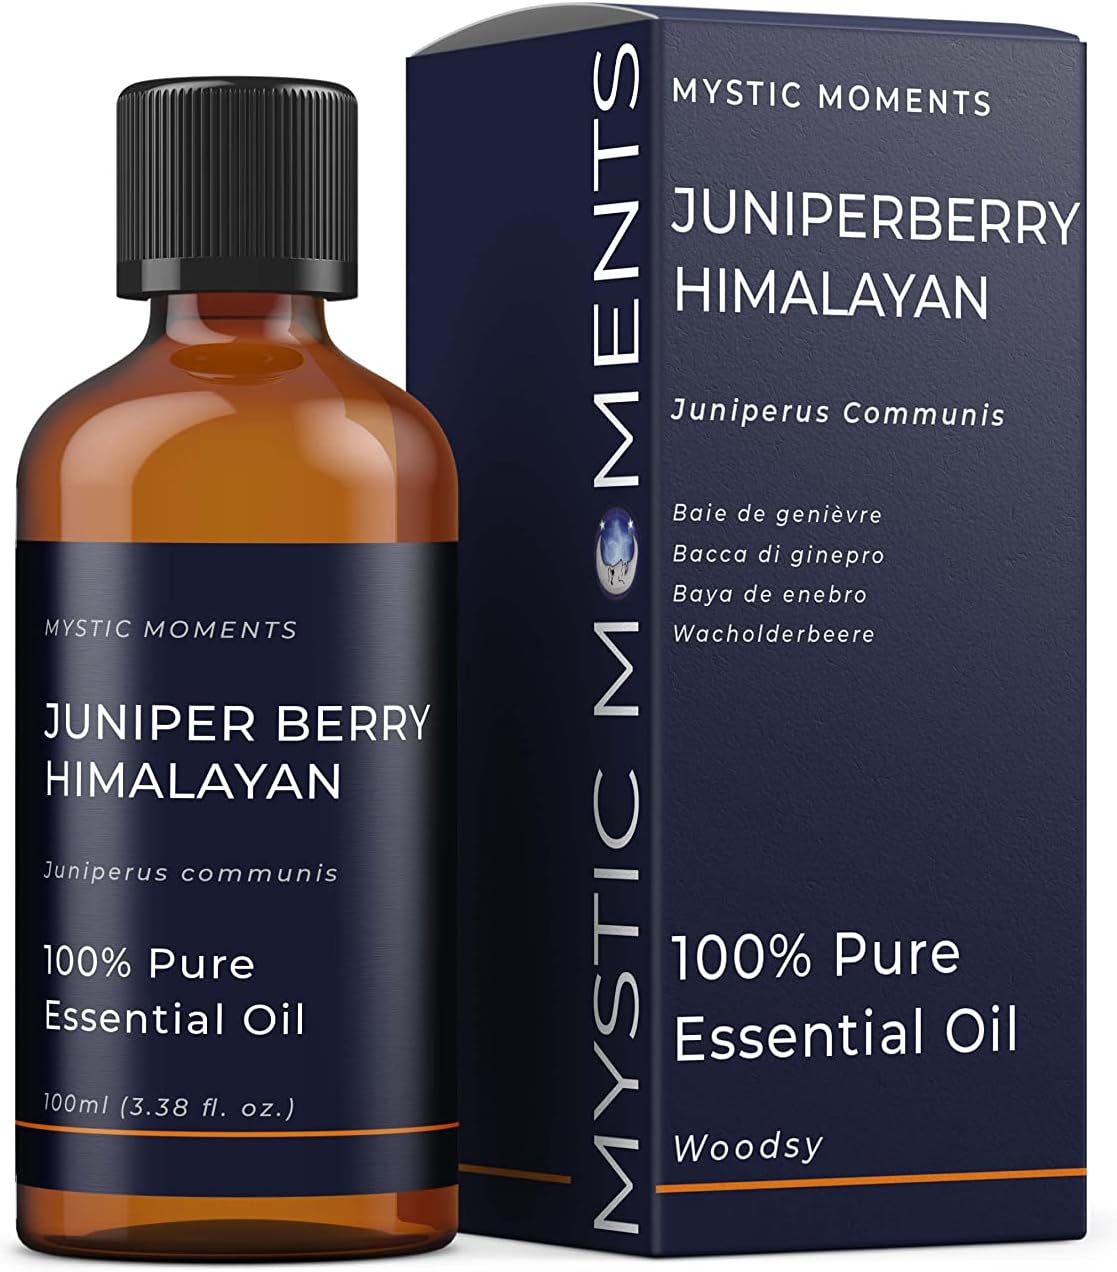 Mystic Moments | Juniper Berry Himalayan Essential Oil 100ml - Pure & Natural oil for Diffusers, Aromatherapy & Massage Blends Vegan GMO Free